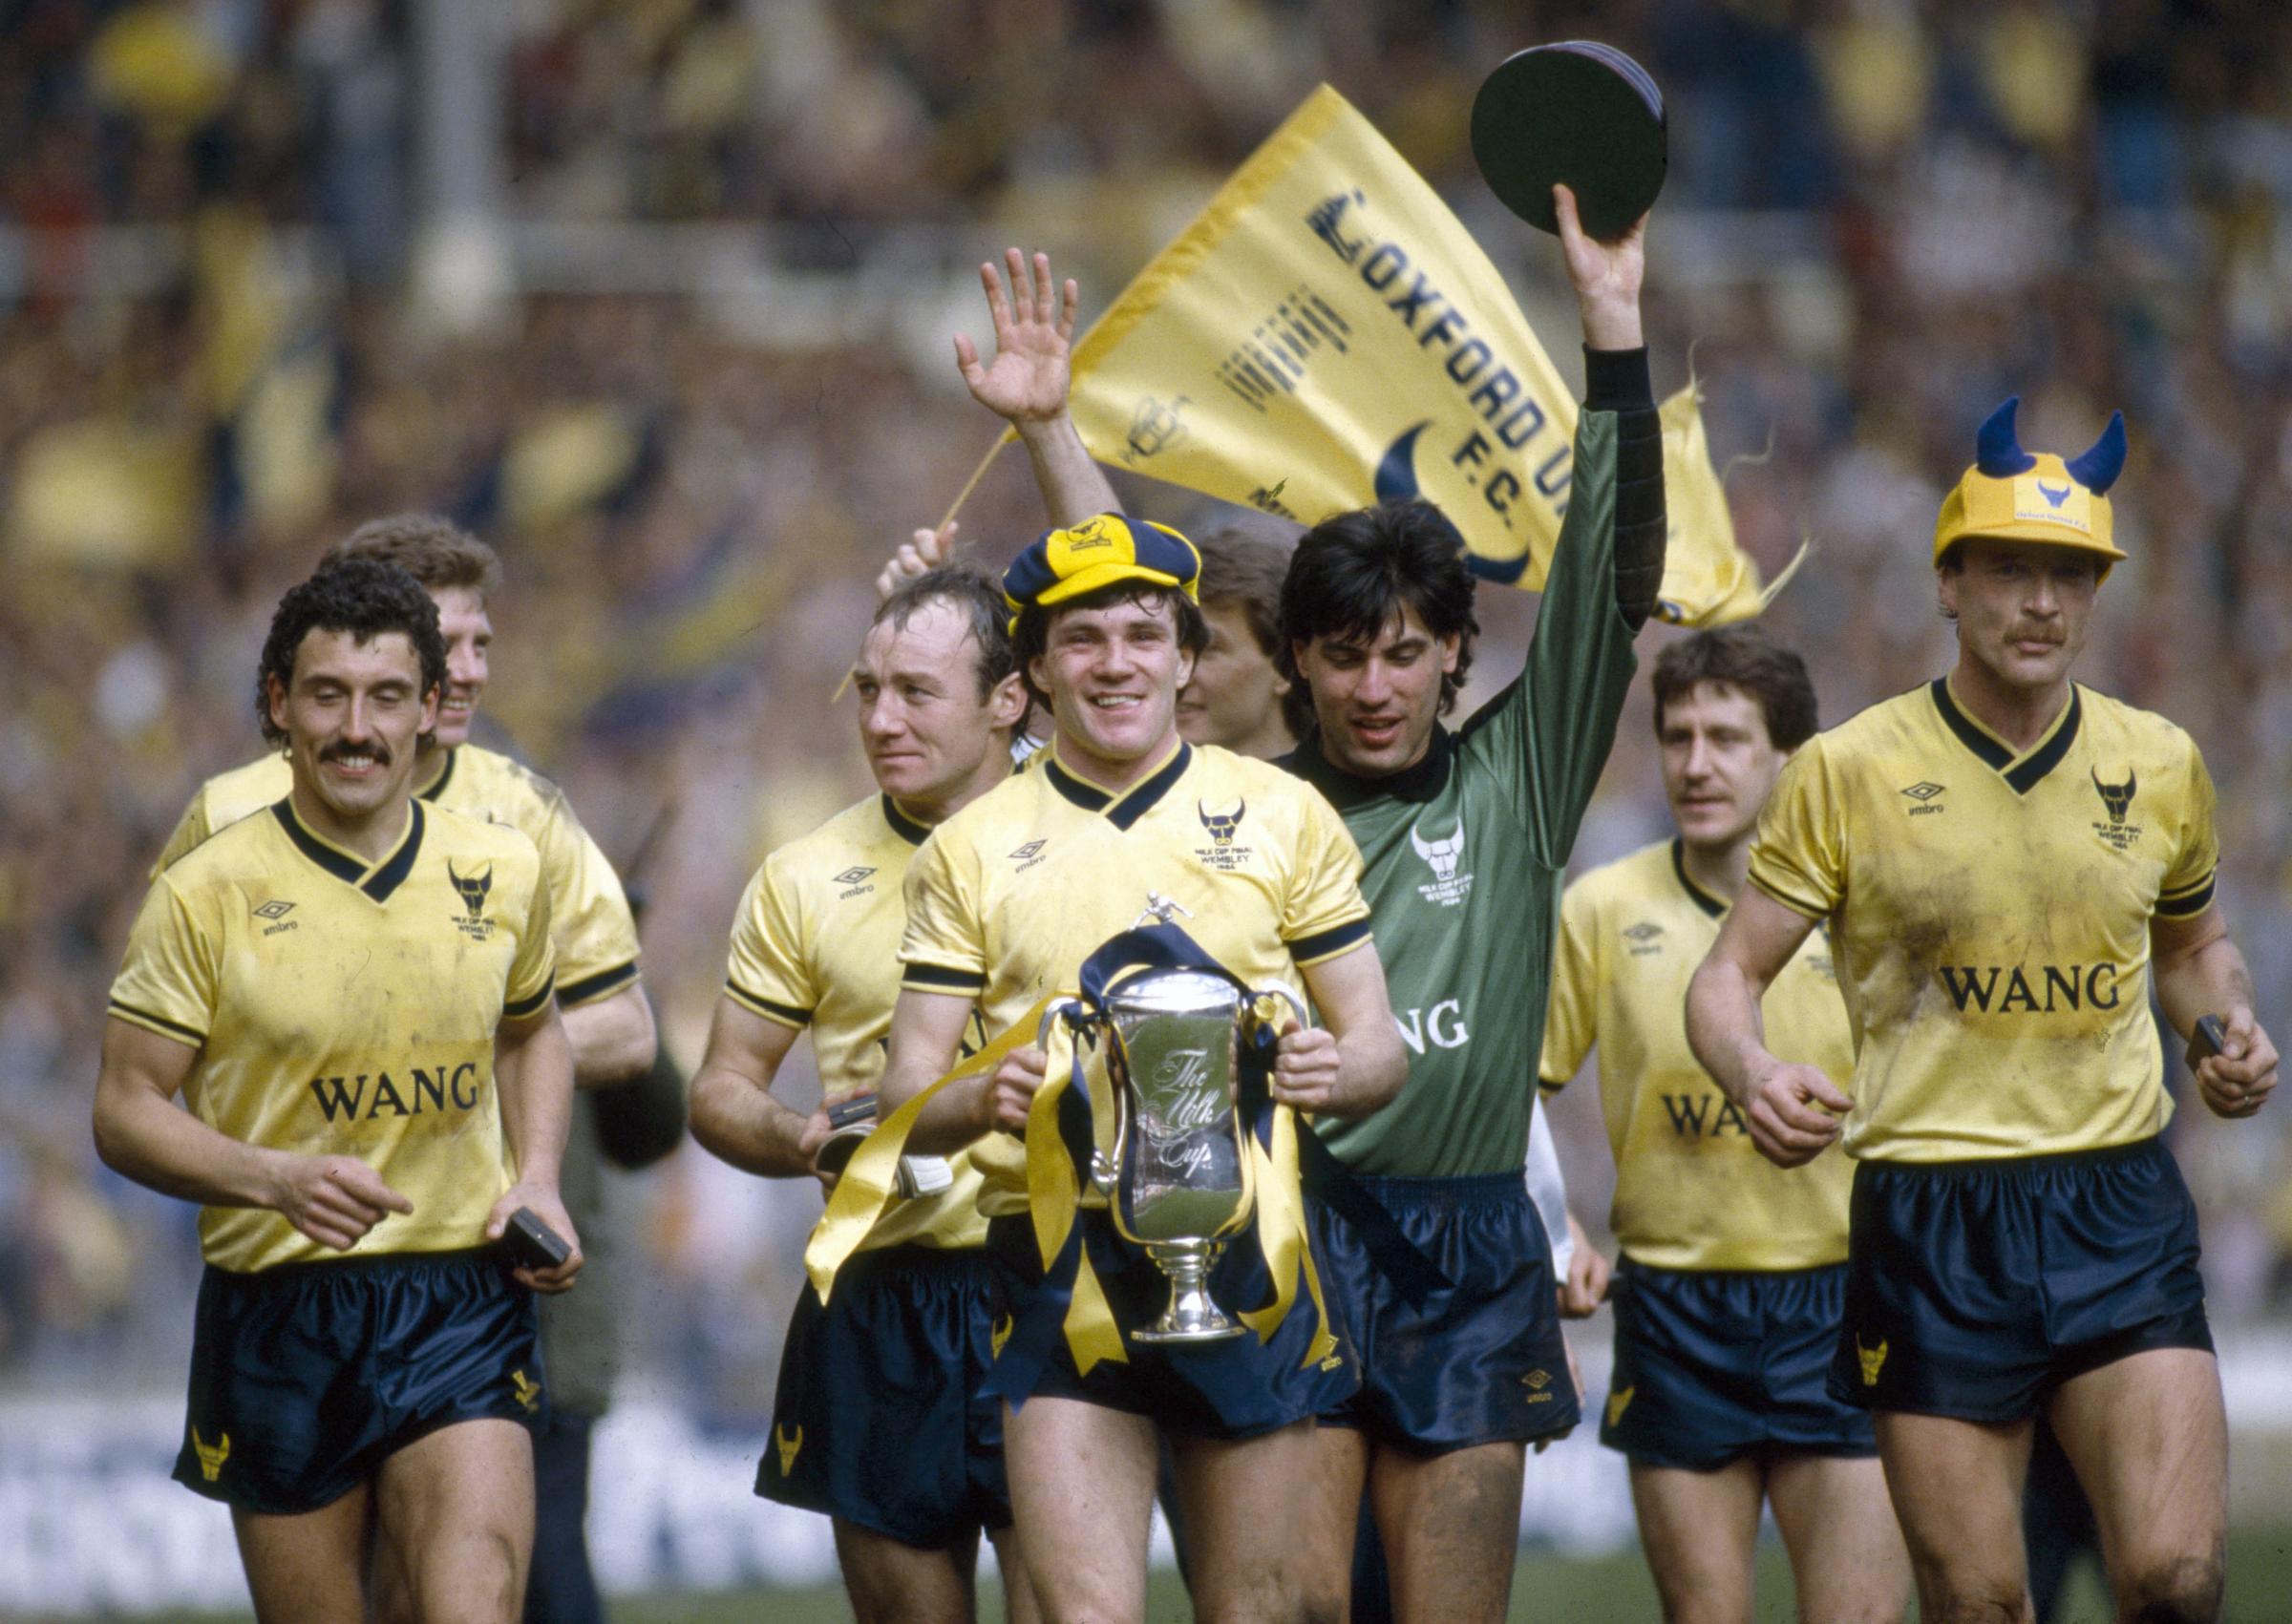 Oxford Mail report of Oxford United 3-0 QPR in 1986 Milk Cup final